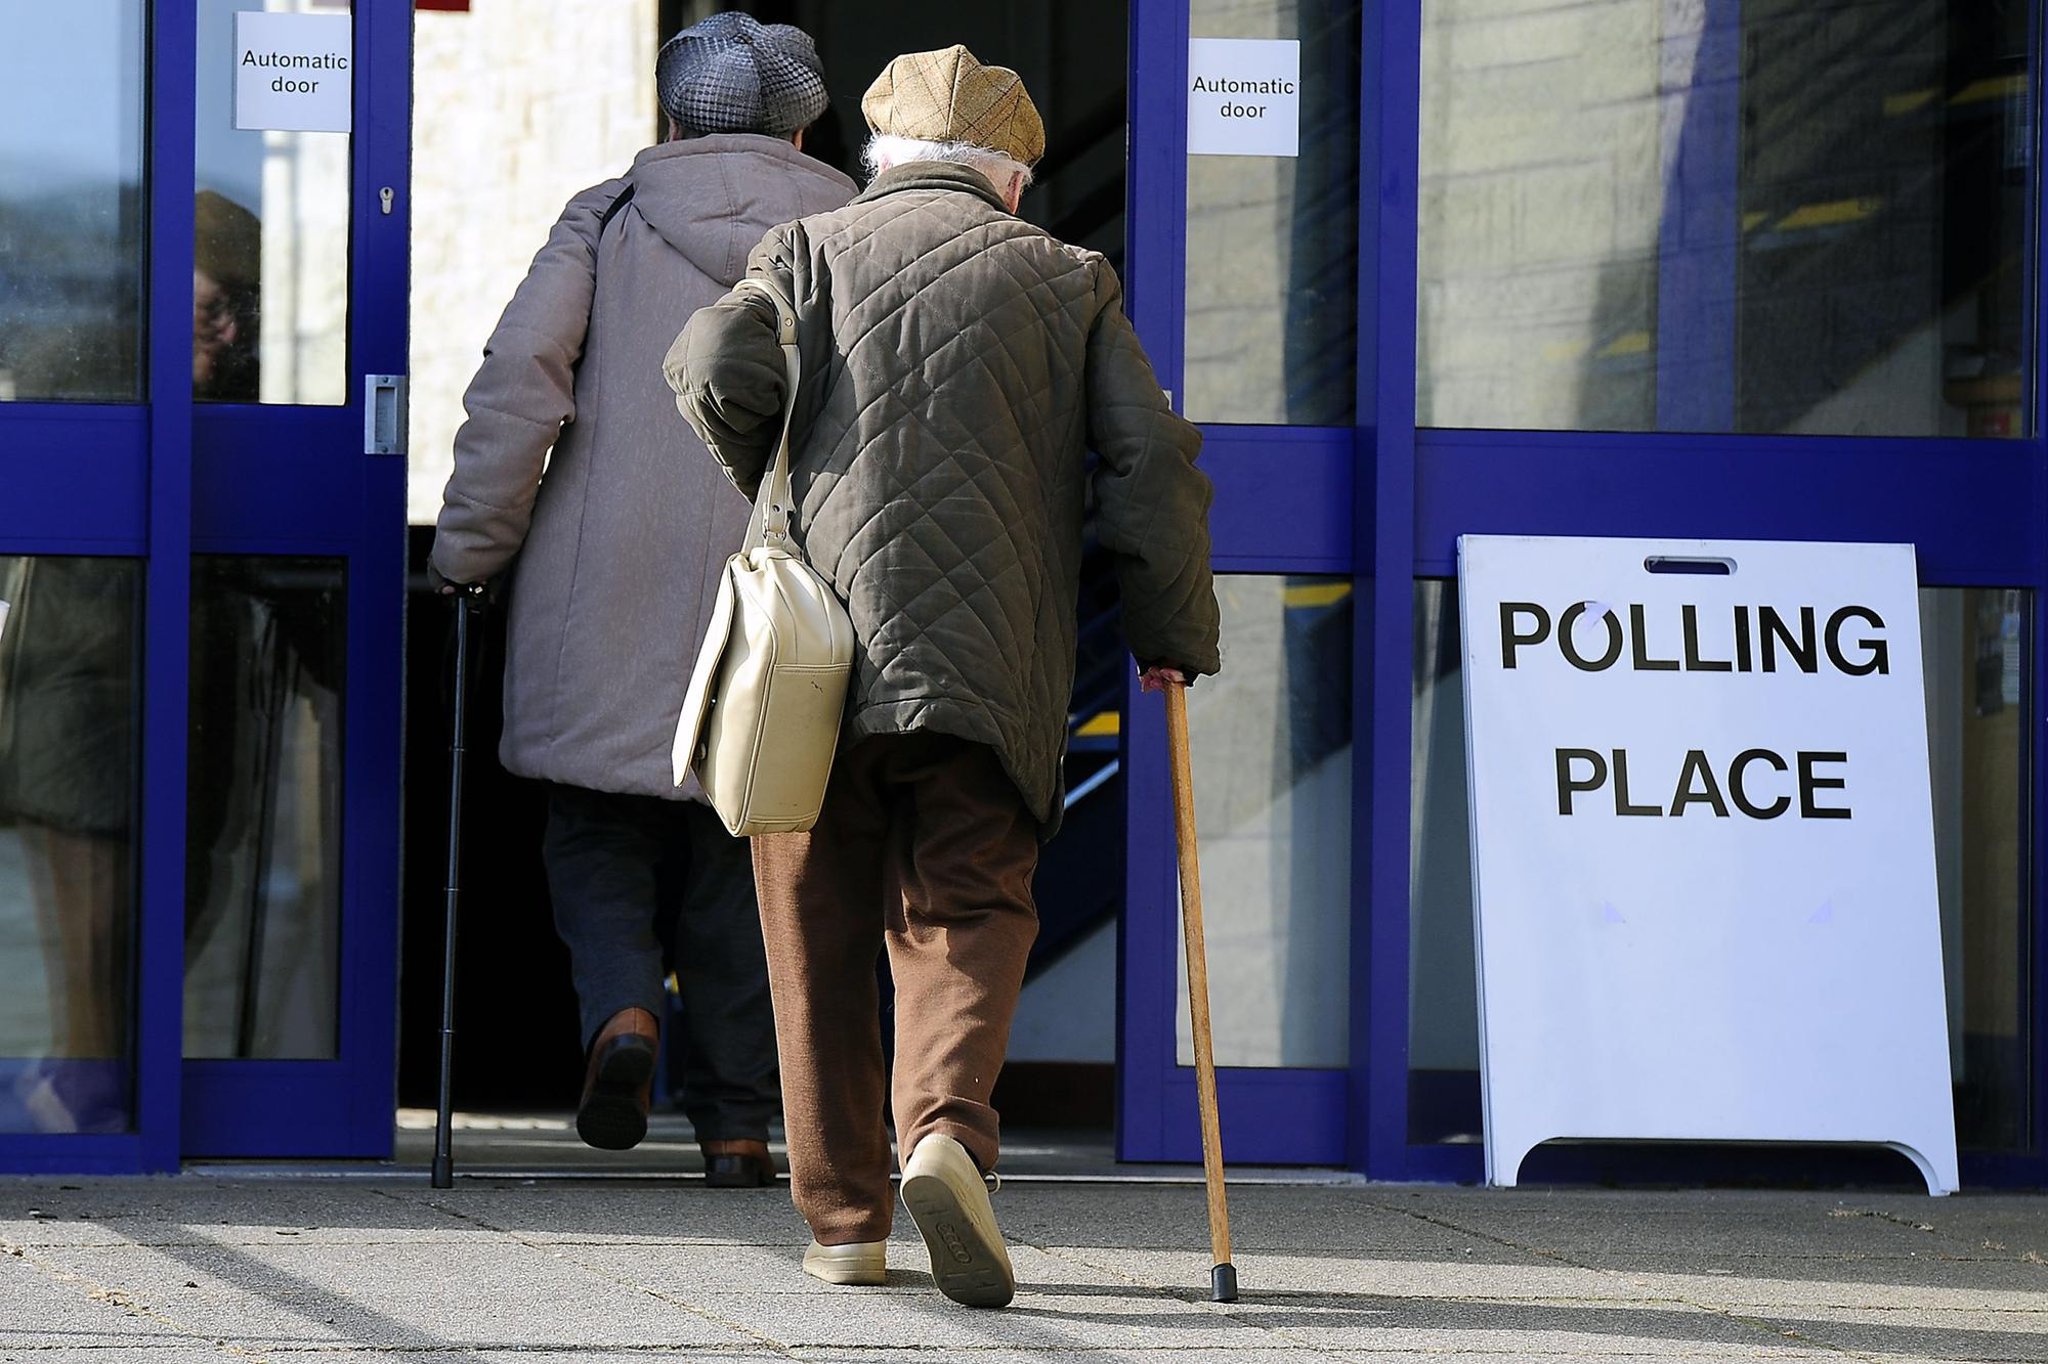 Scottish election: These are the candidates standing in Falkirk West